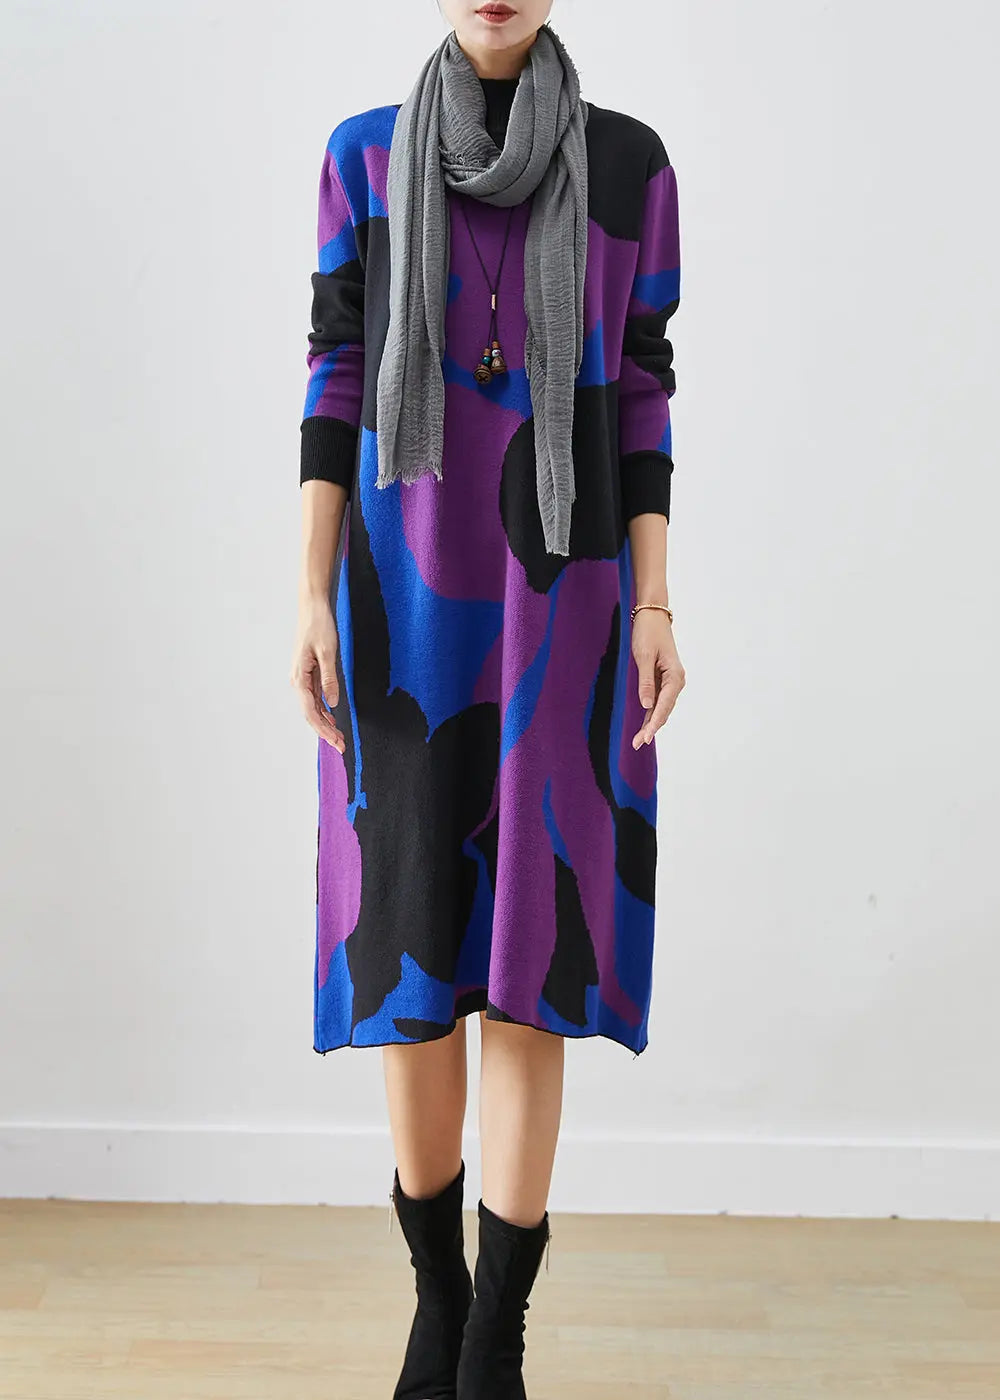 French Colorblock Turtle Neck Print Knit A Line Dresses Fall Ada Fashion